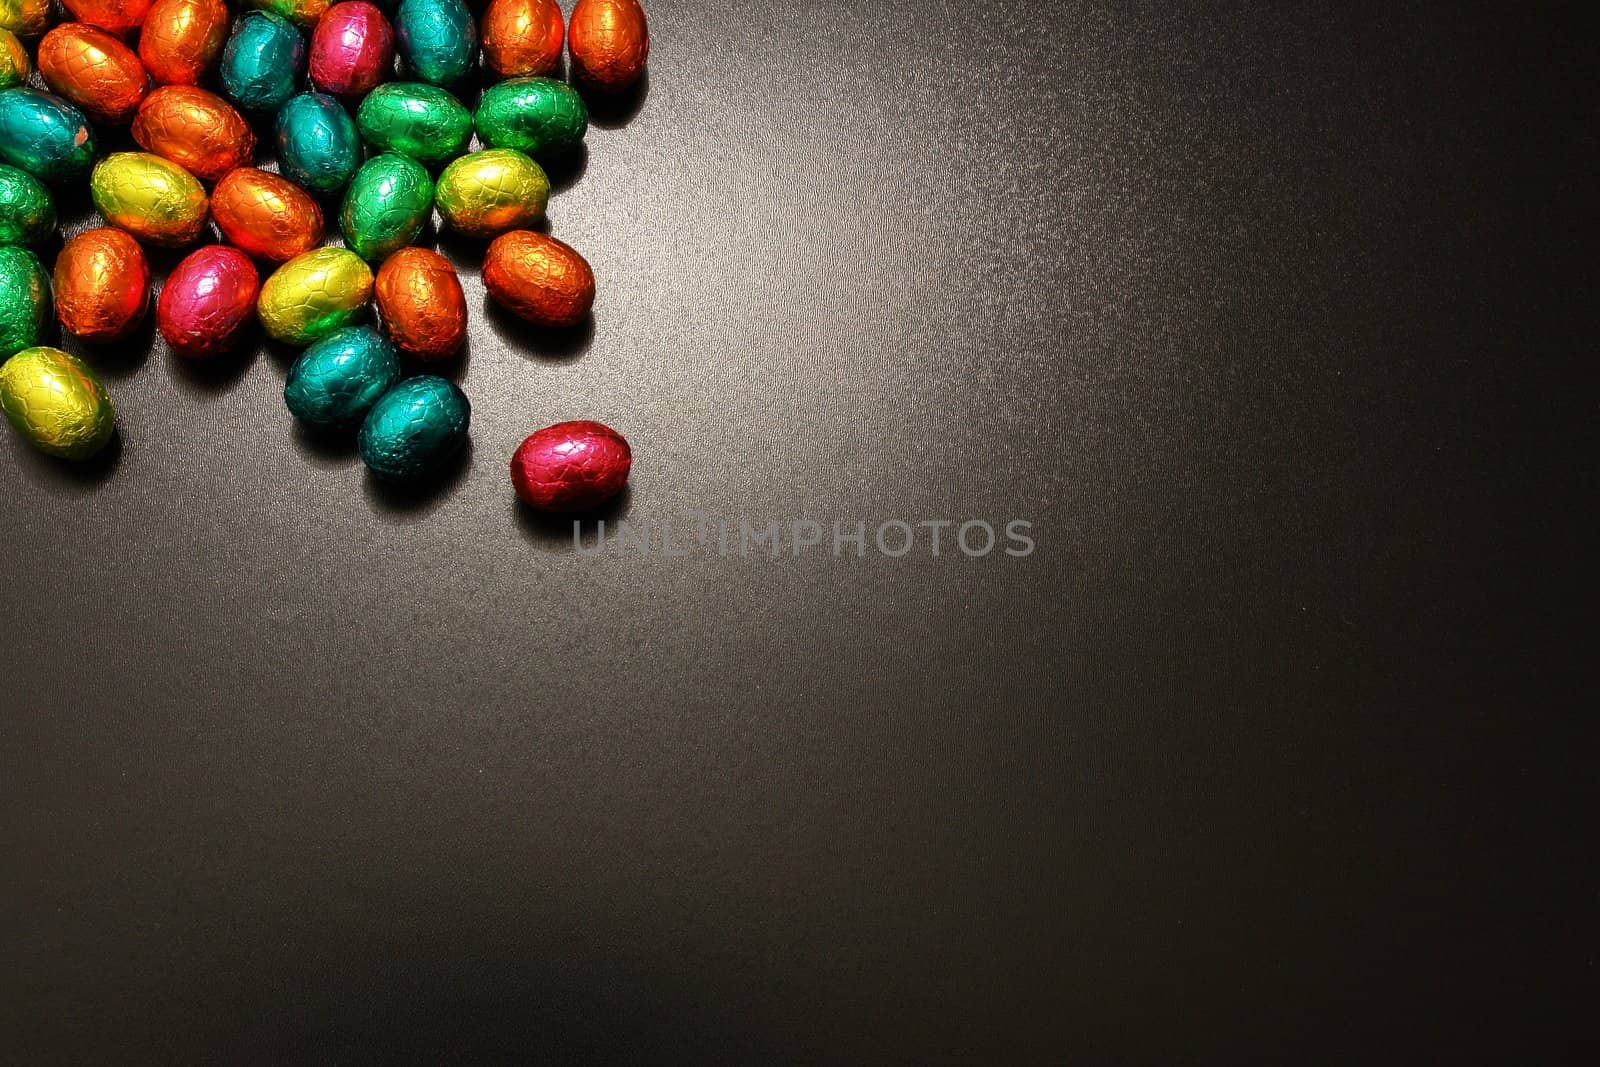 Picture of some colorfull easter eggs inside..